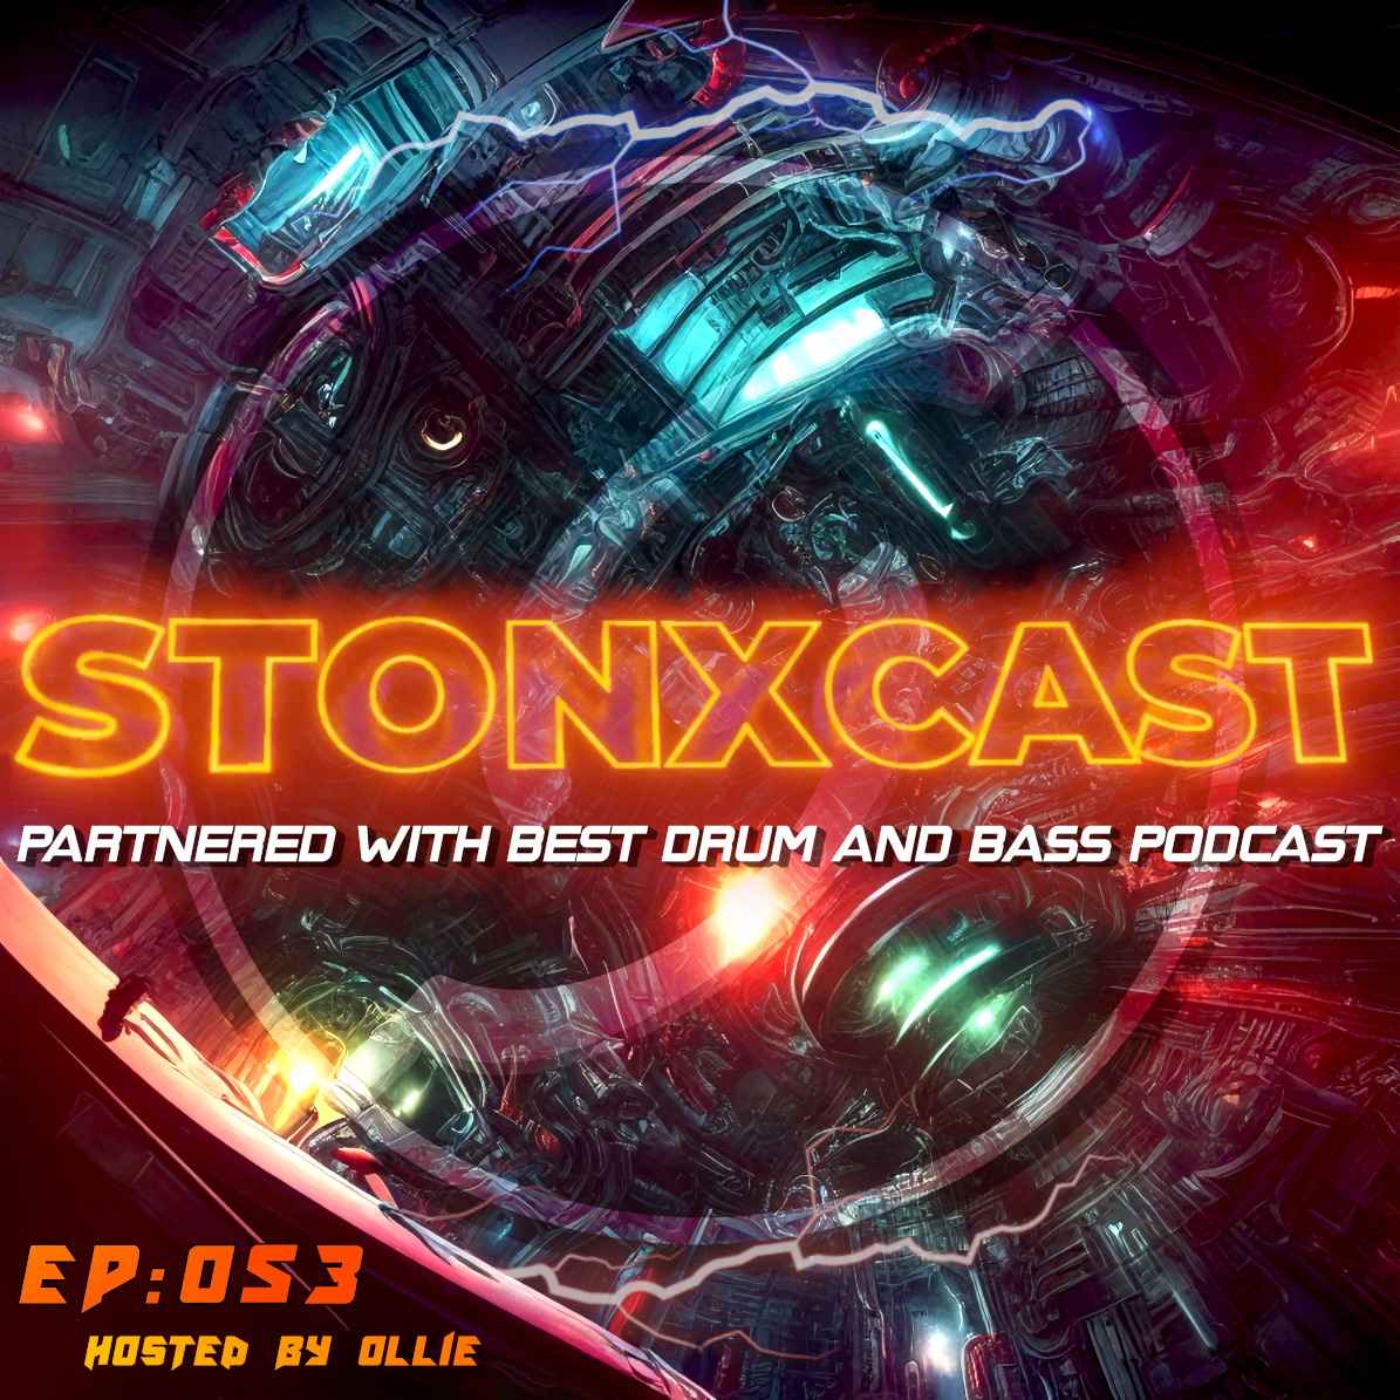 Stonxcast EP:053 - Hosted by Ollie Artwork